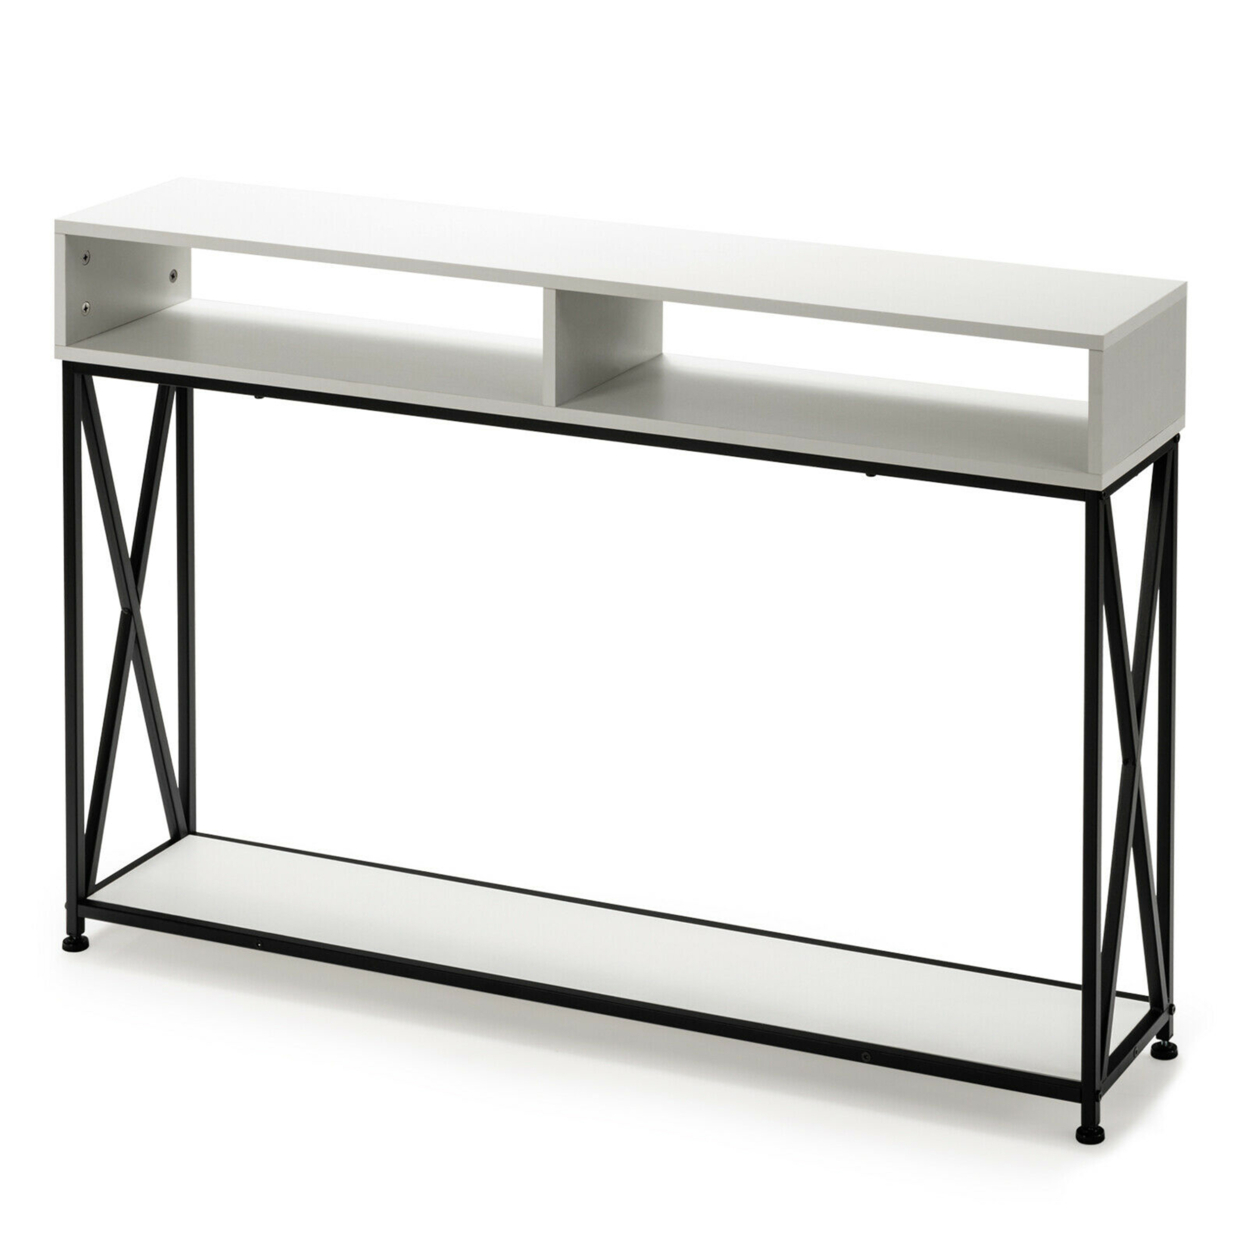 Console Table With Open Shelf And Storage Compartments Steel Frame - White